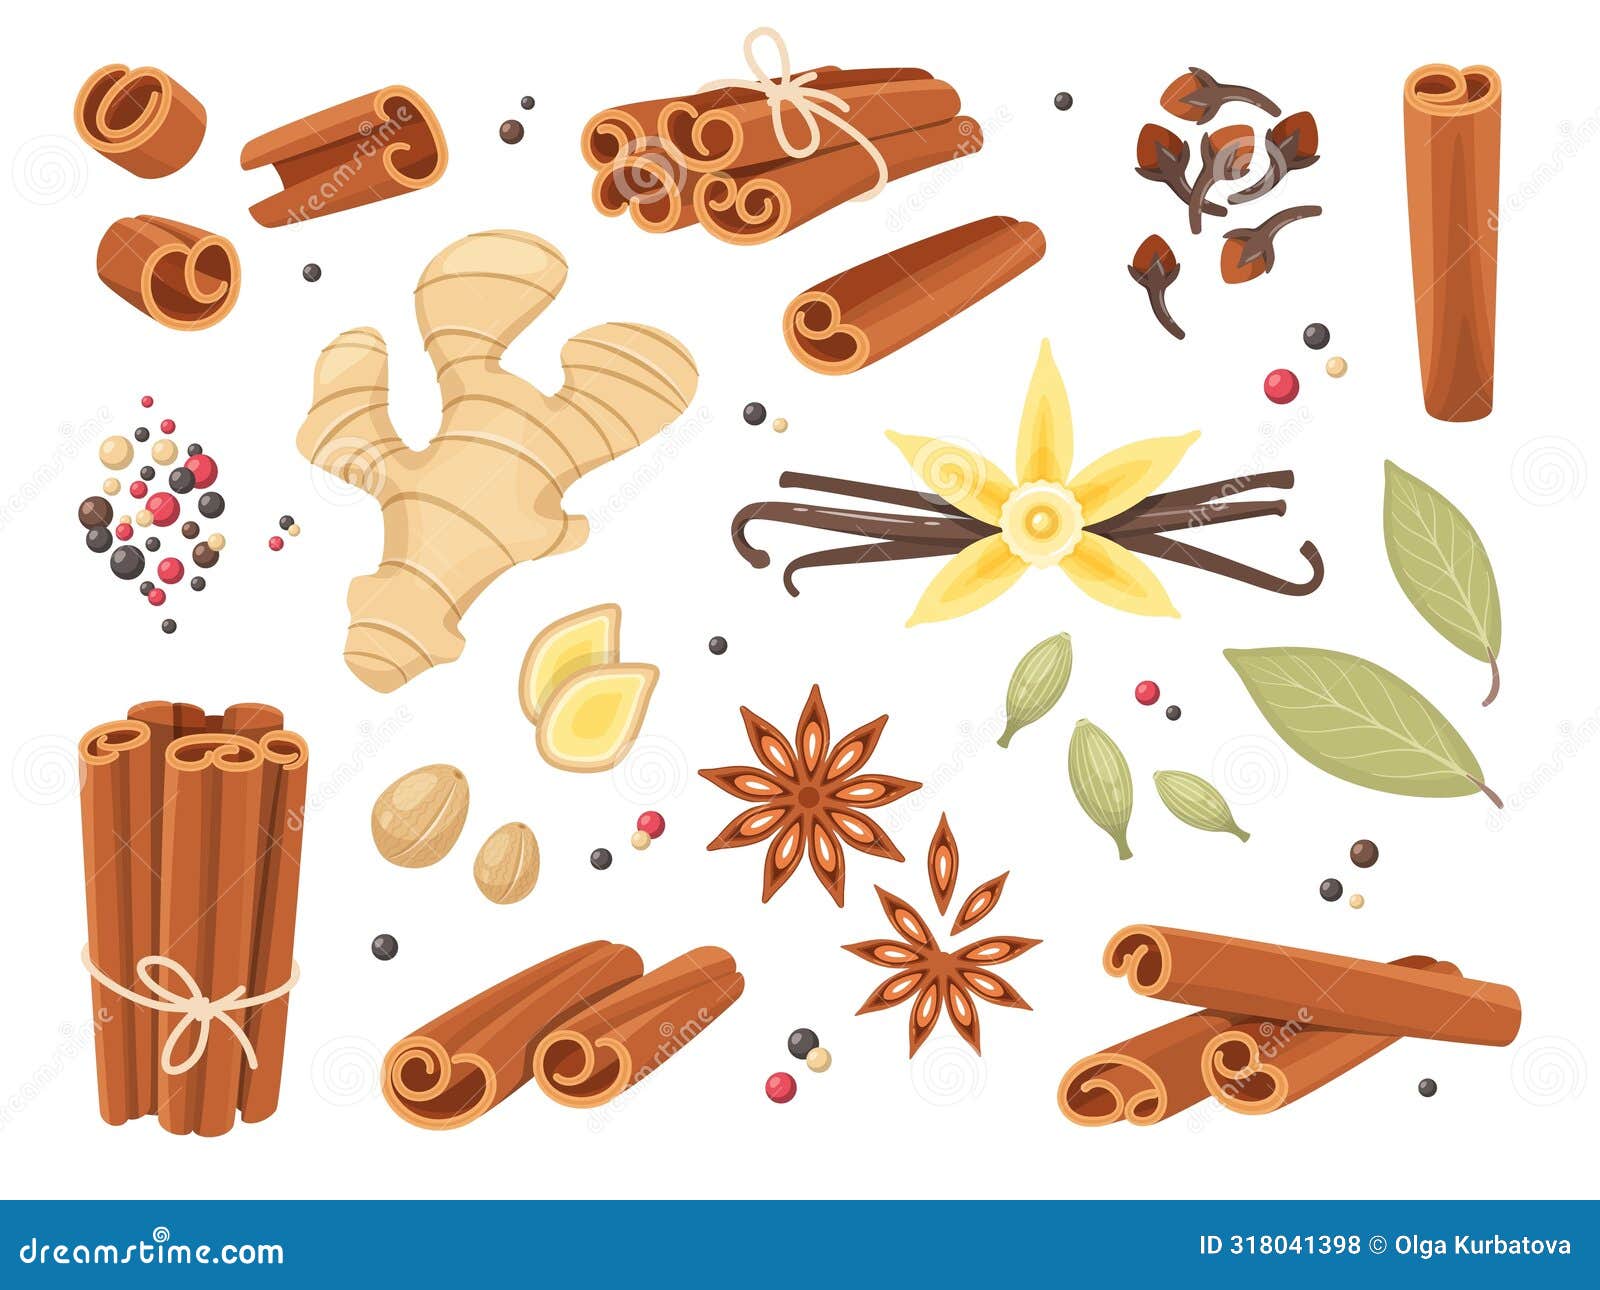 cartoon dry spices. cinnamon sticks, allspice peas, cloves and anise stars, fragrant organic seeds, roots, ginger and